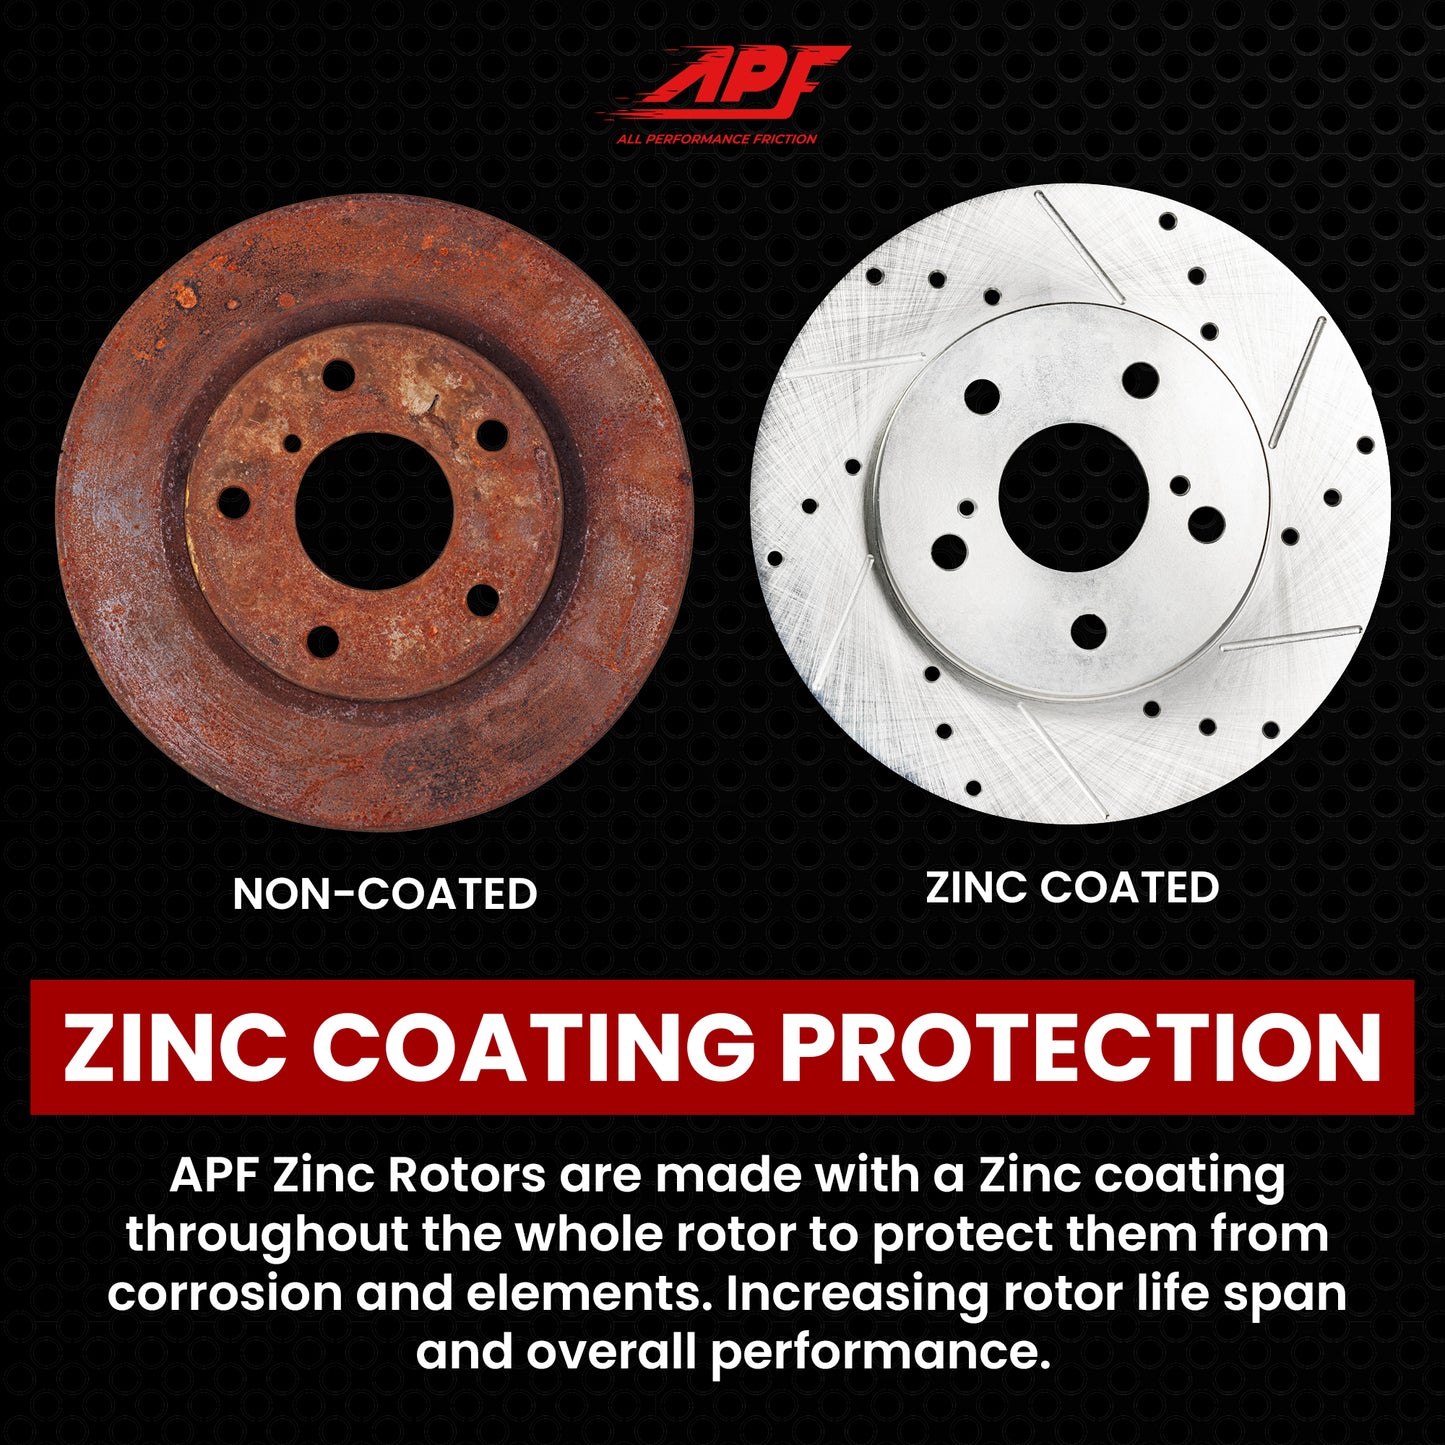 APF All Performance Friction Rear Rotors compatible with Lexus IS250 2007-2012 Zinc Drilled Slotted Rotors | $90.89